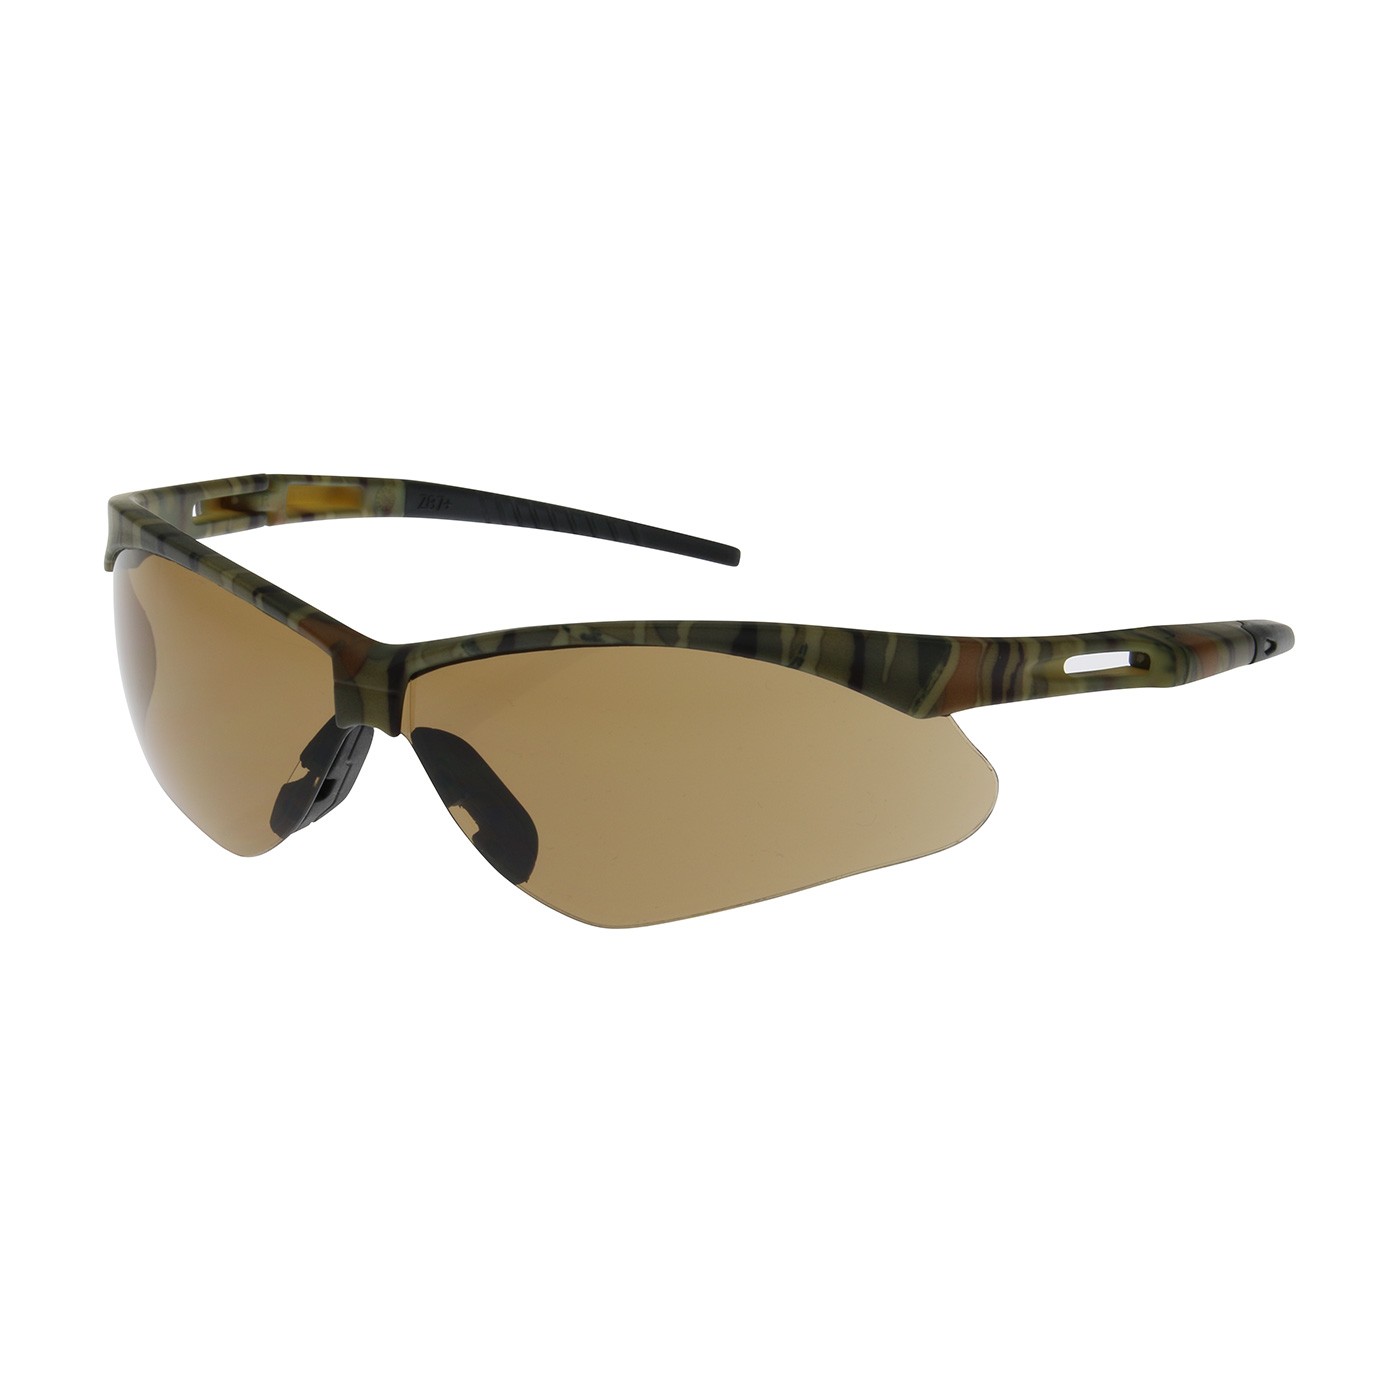 Anser™ Semi-Rimless Safety Glasses with Camouflage Frame, Brown Lens and Anti-Fog / Anti-Scratch Coating  (#250-AN-10124)